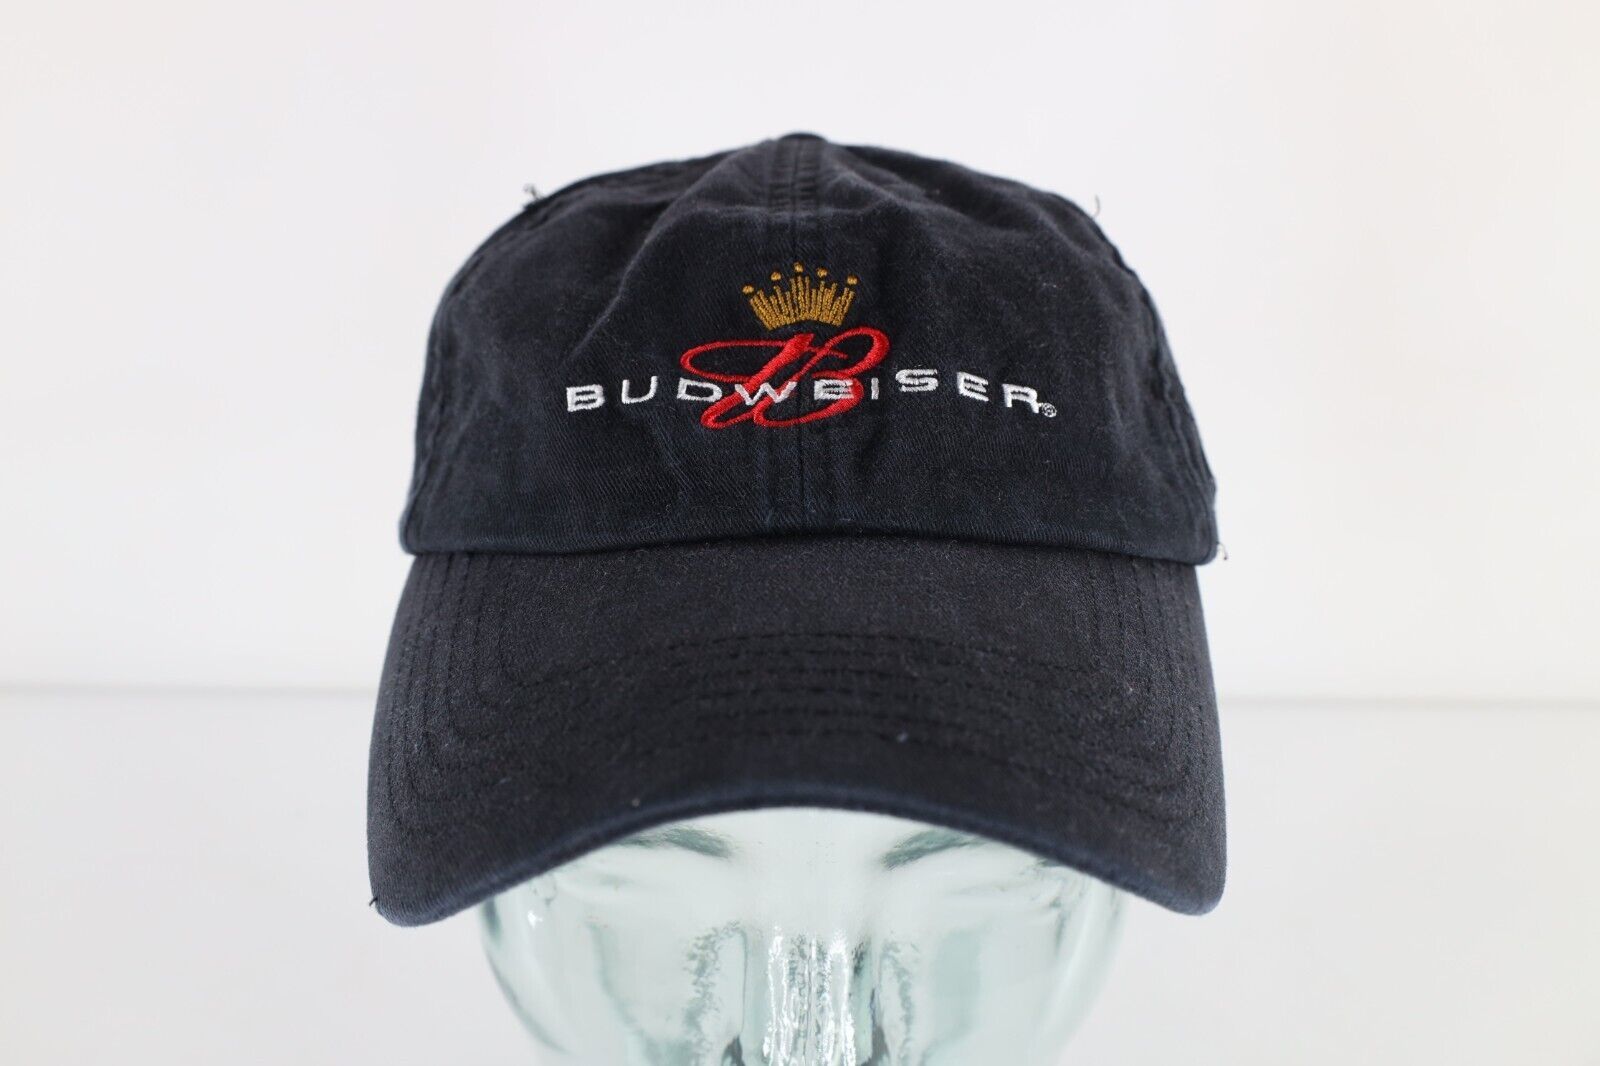 Primary image for Vintage 90s Spell Out Faded Budweiser Beer Adjustable Cotton Dad Hat Cap Black